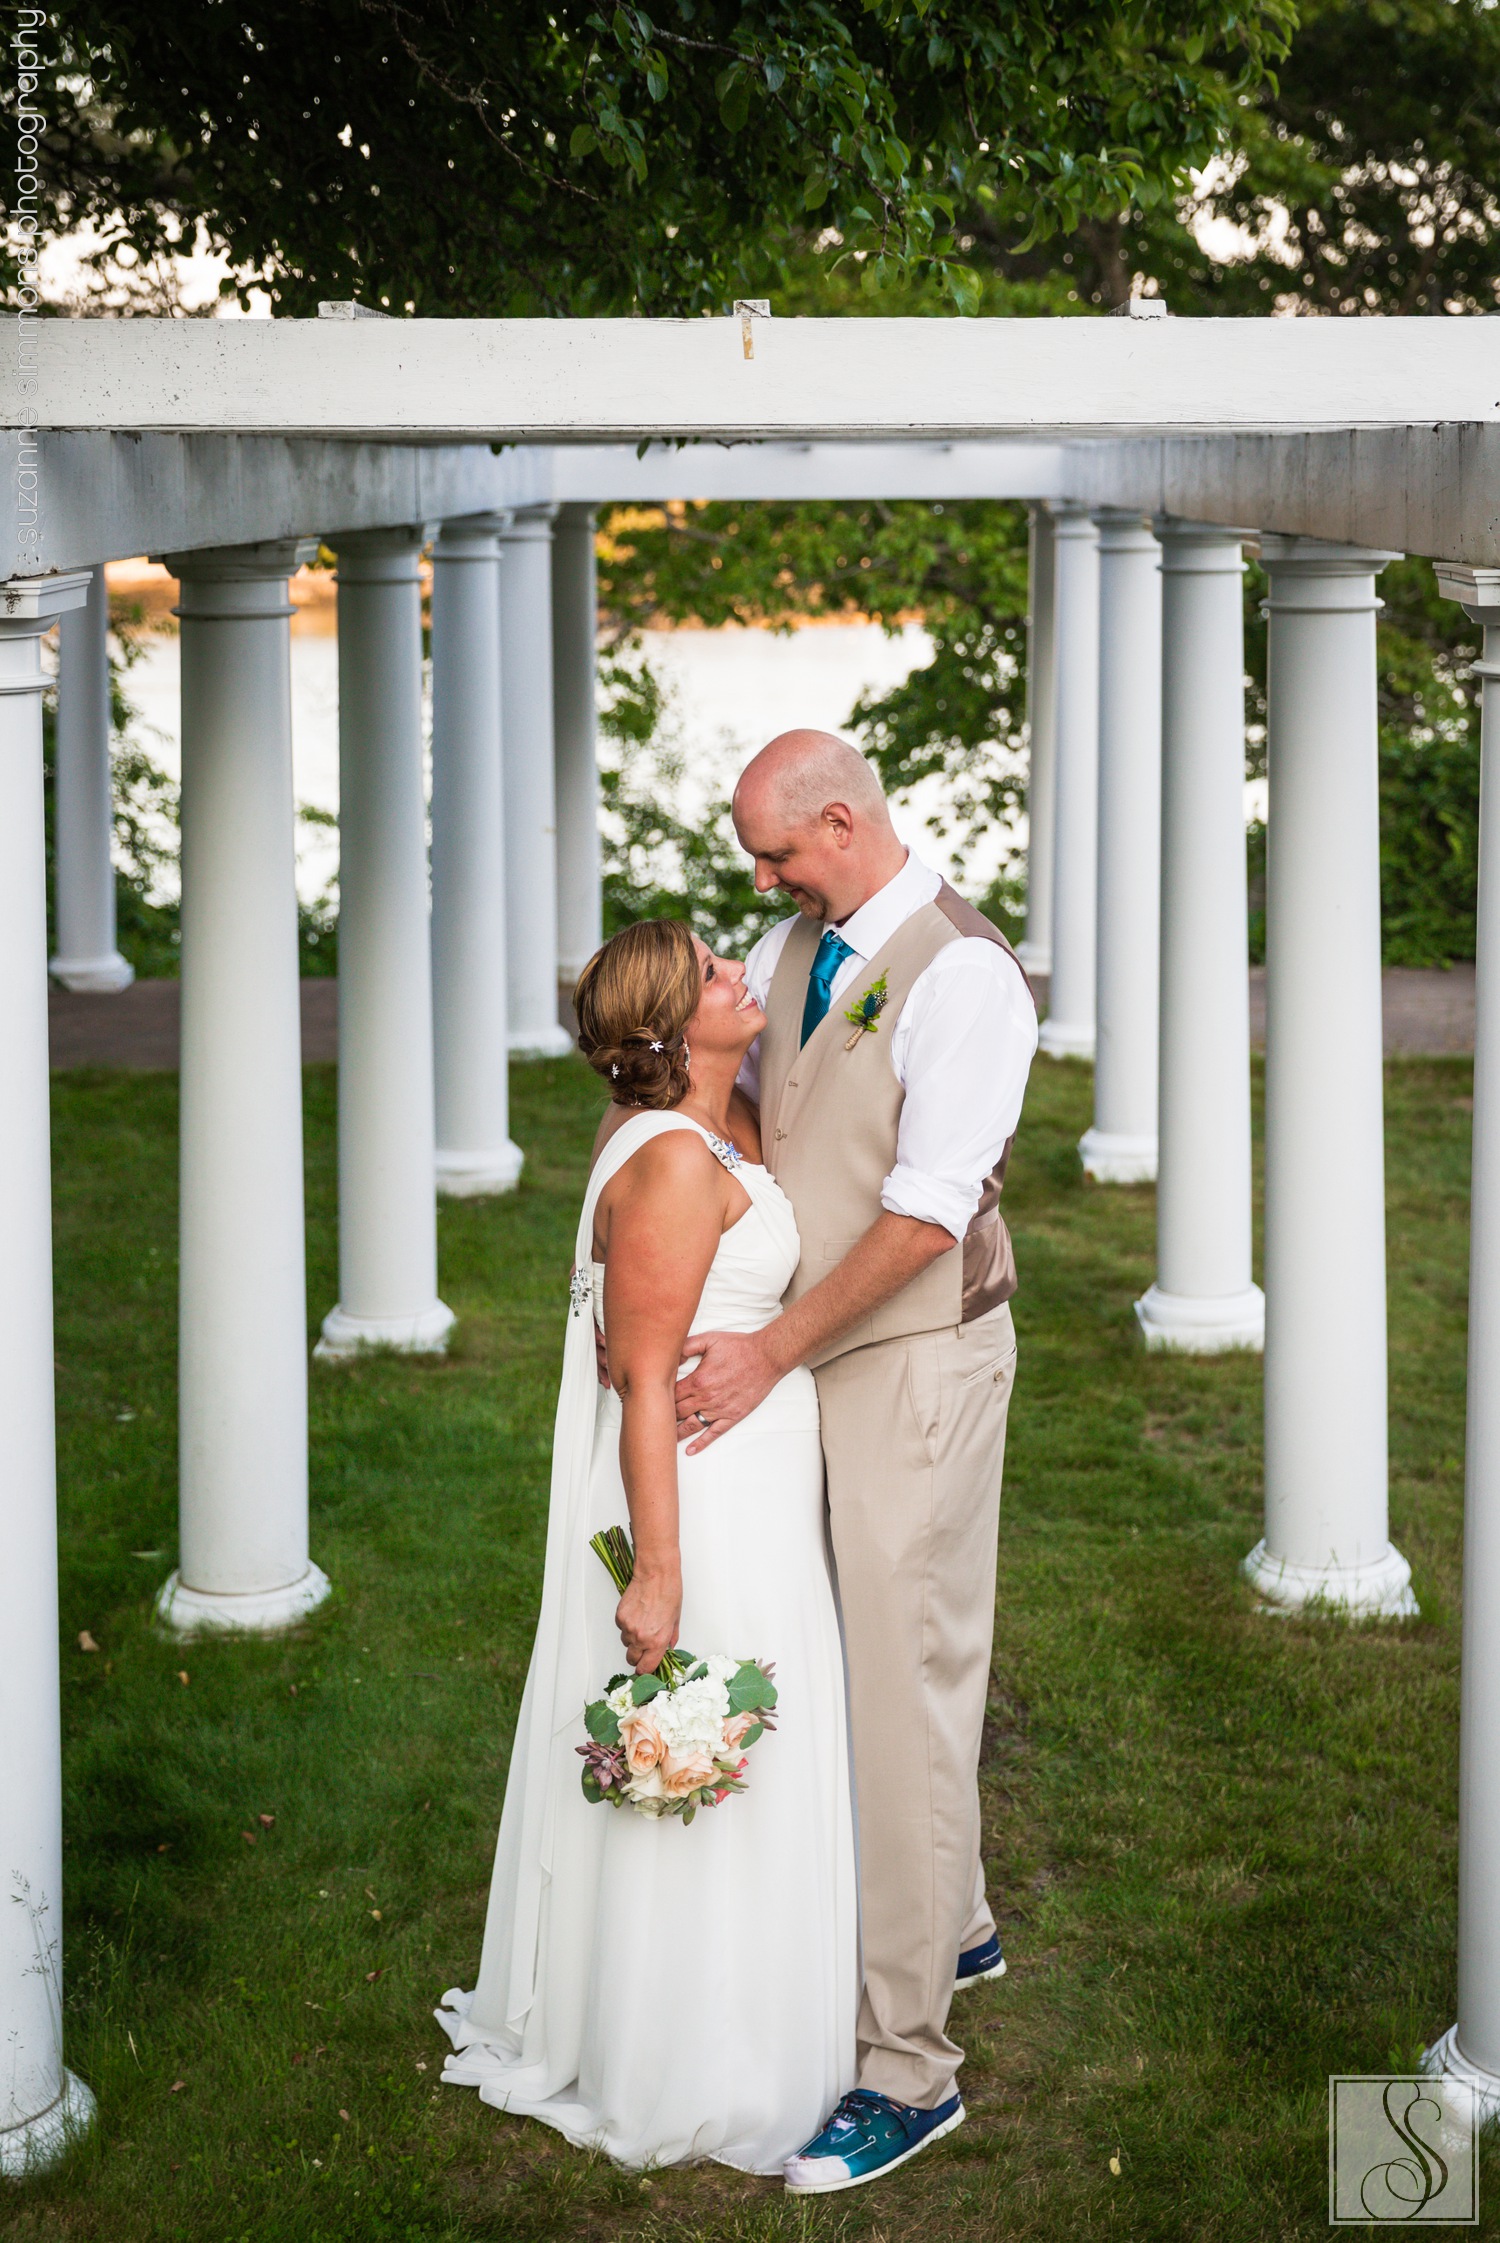 Maine Wedding at The Mooring Bed & Breakfast